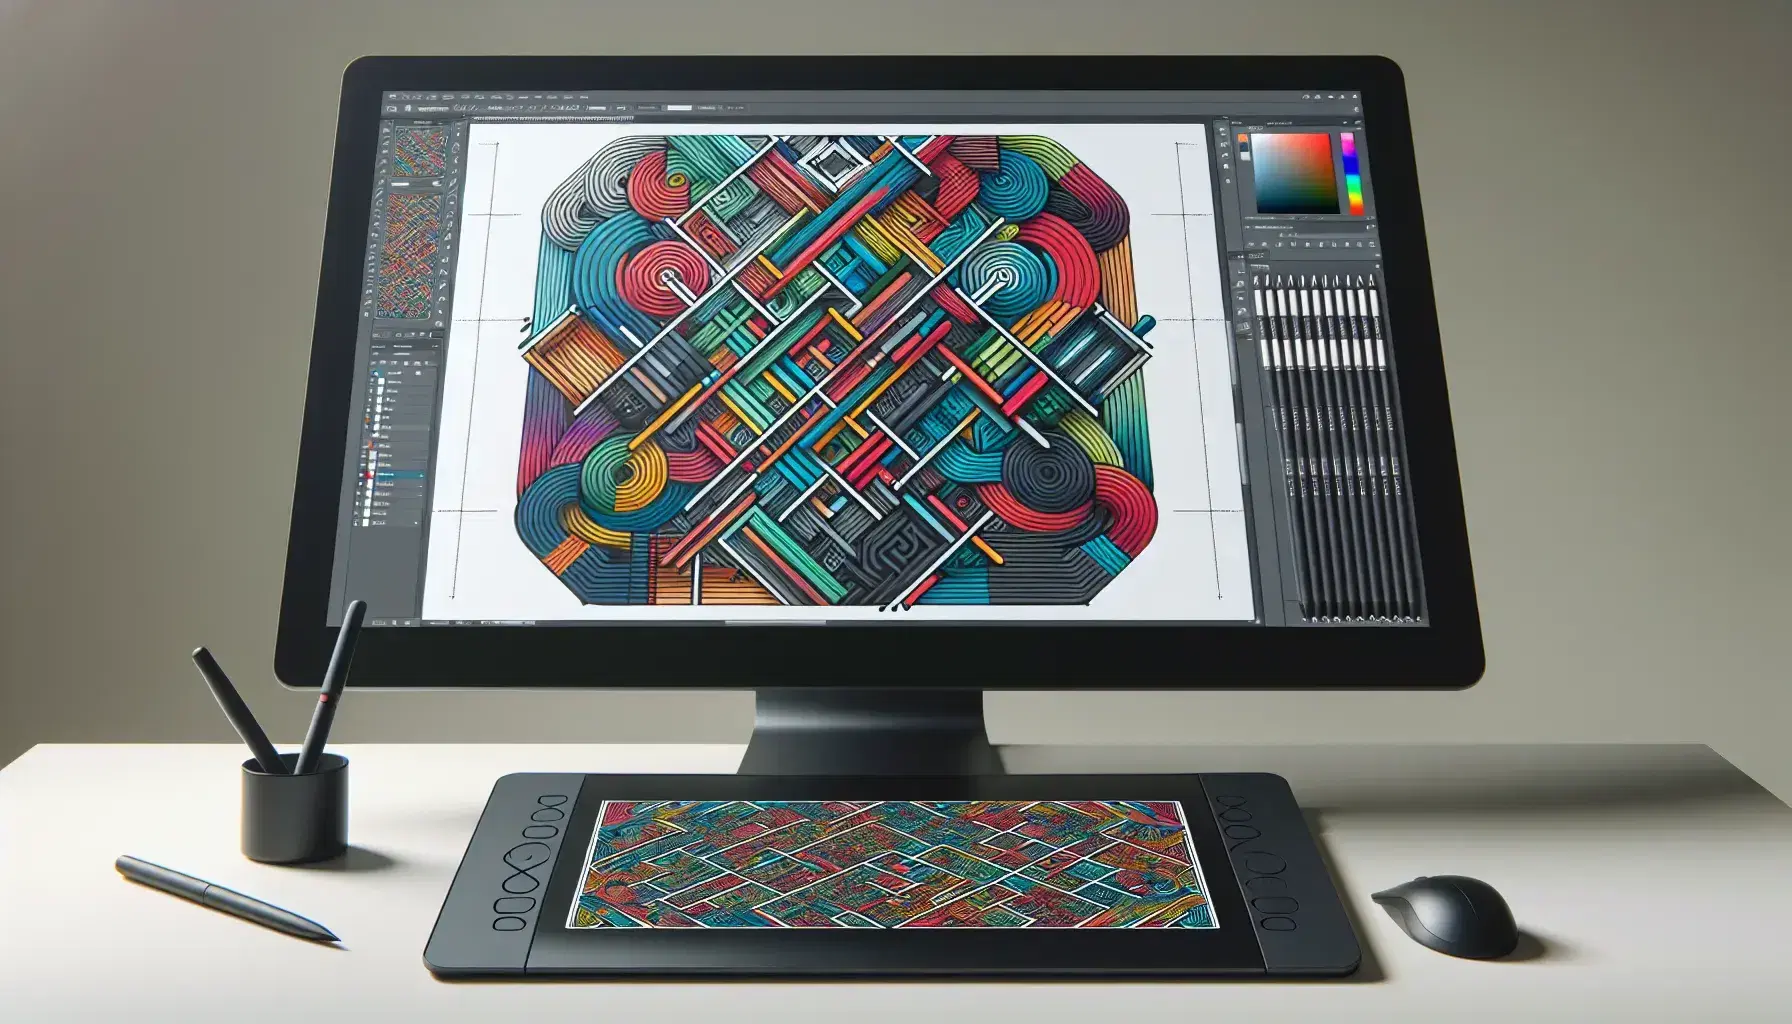 Monitor with vector graphics program showing complex geometric pattern, graphics tablet with stylus and drawing printout on light wooden desk.